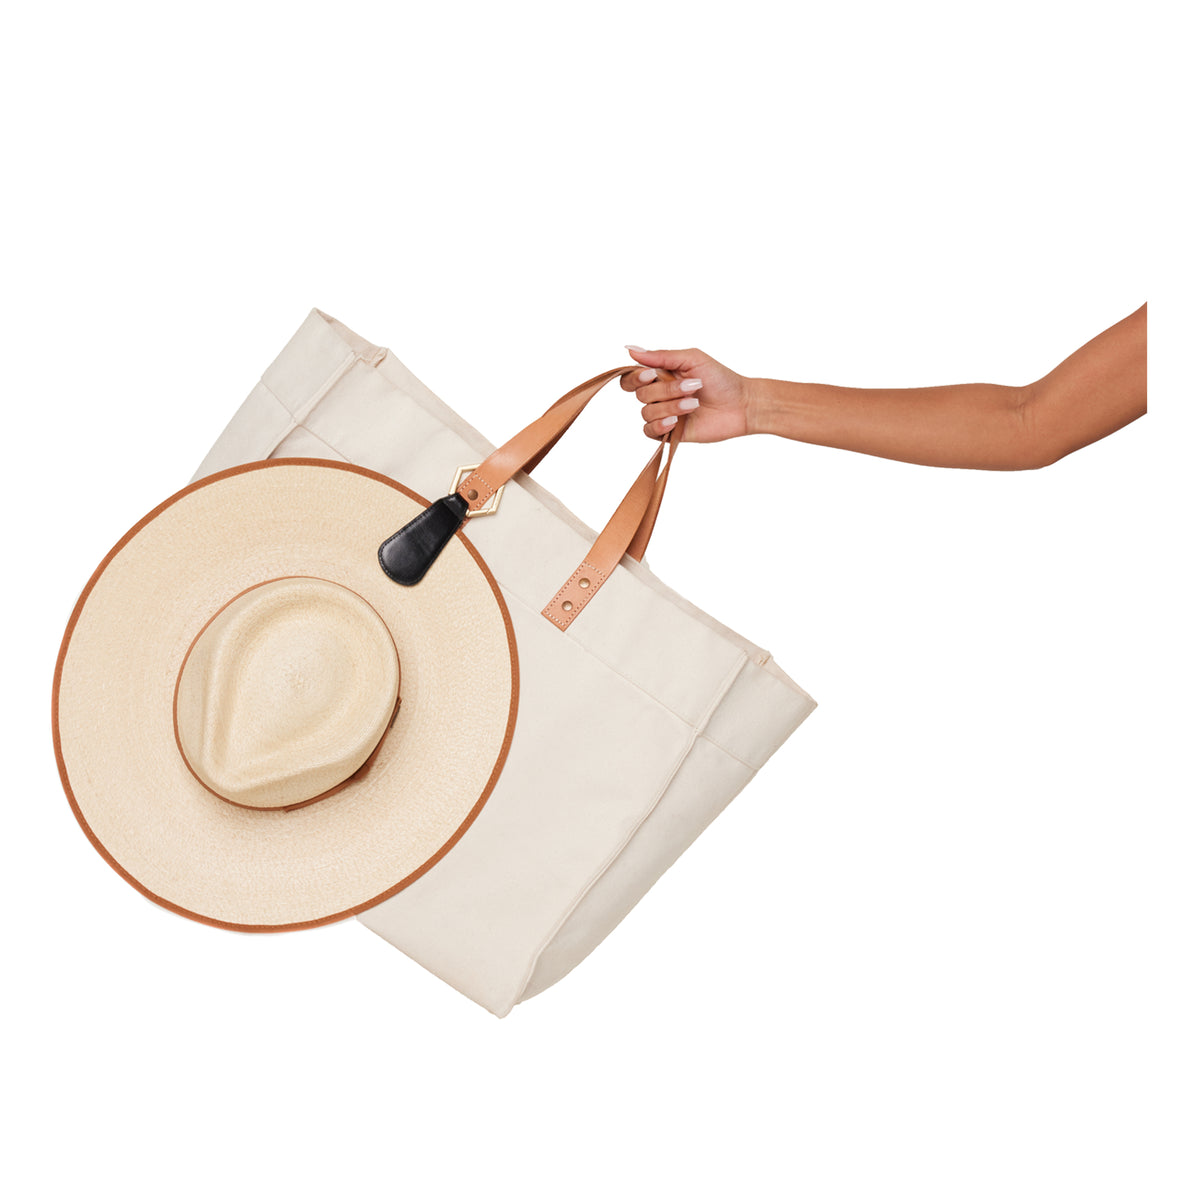 Travel with your hat hands-free! TOPTOTE magnetic hat clip